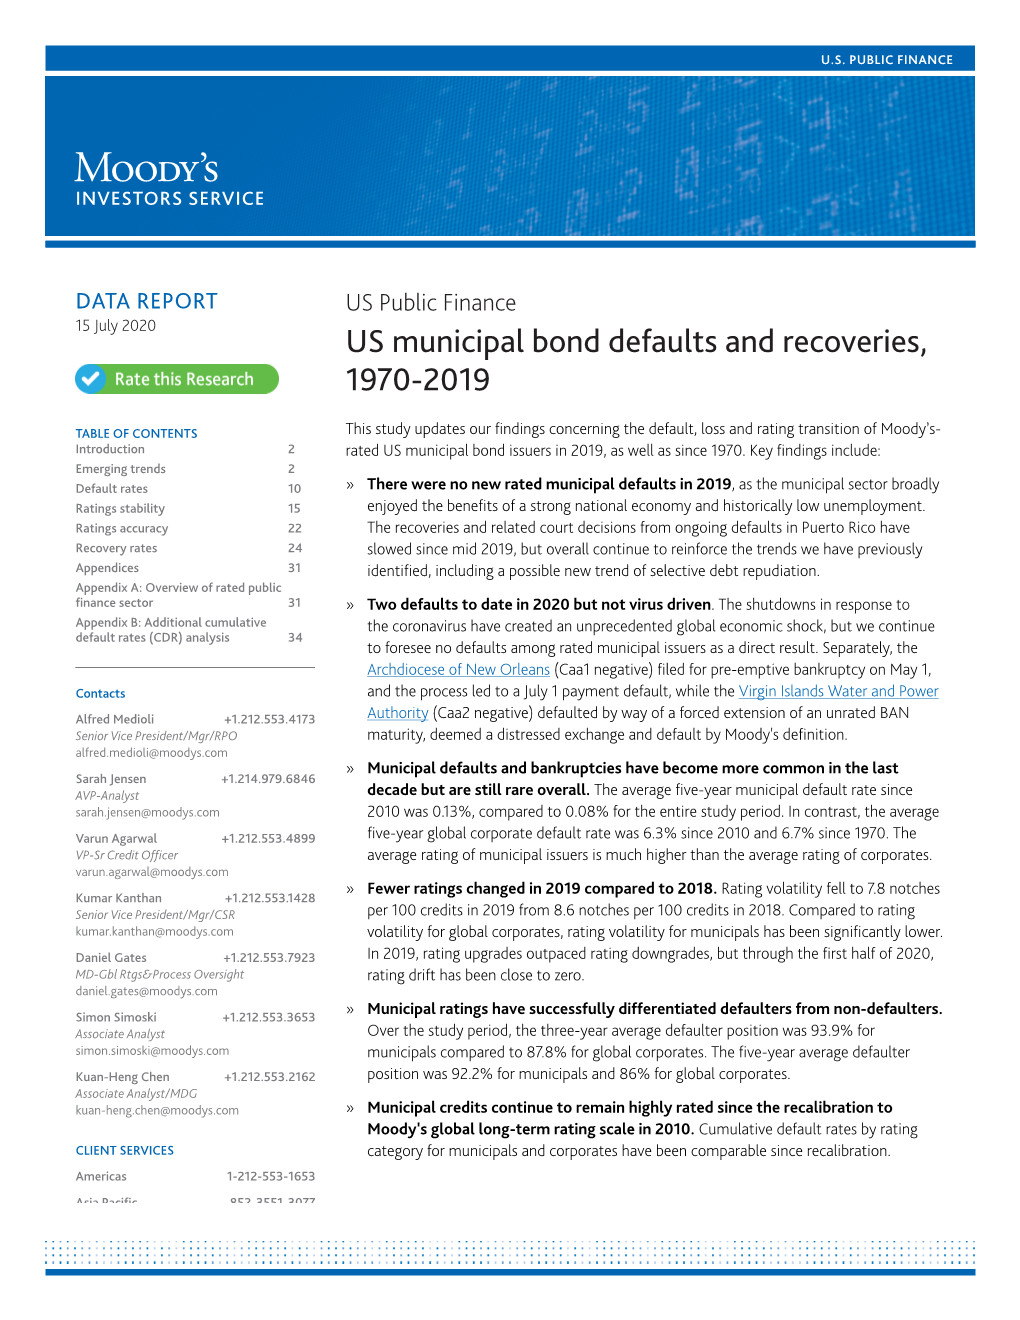 US Municipal Bond Defaults and Recoveries, 1970-2019